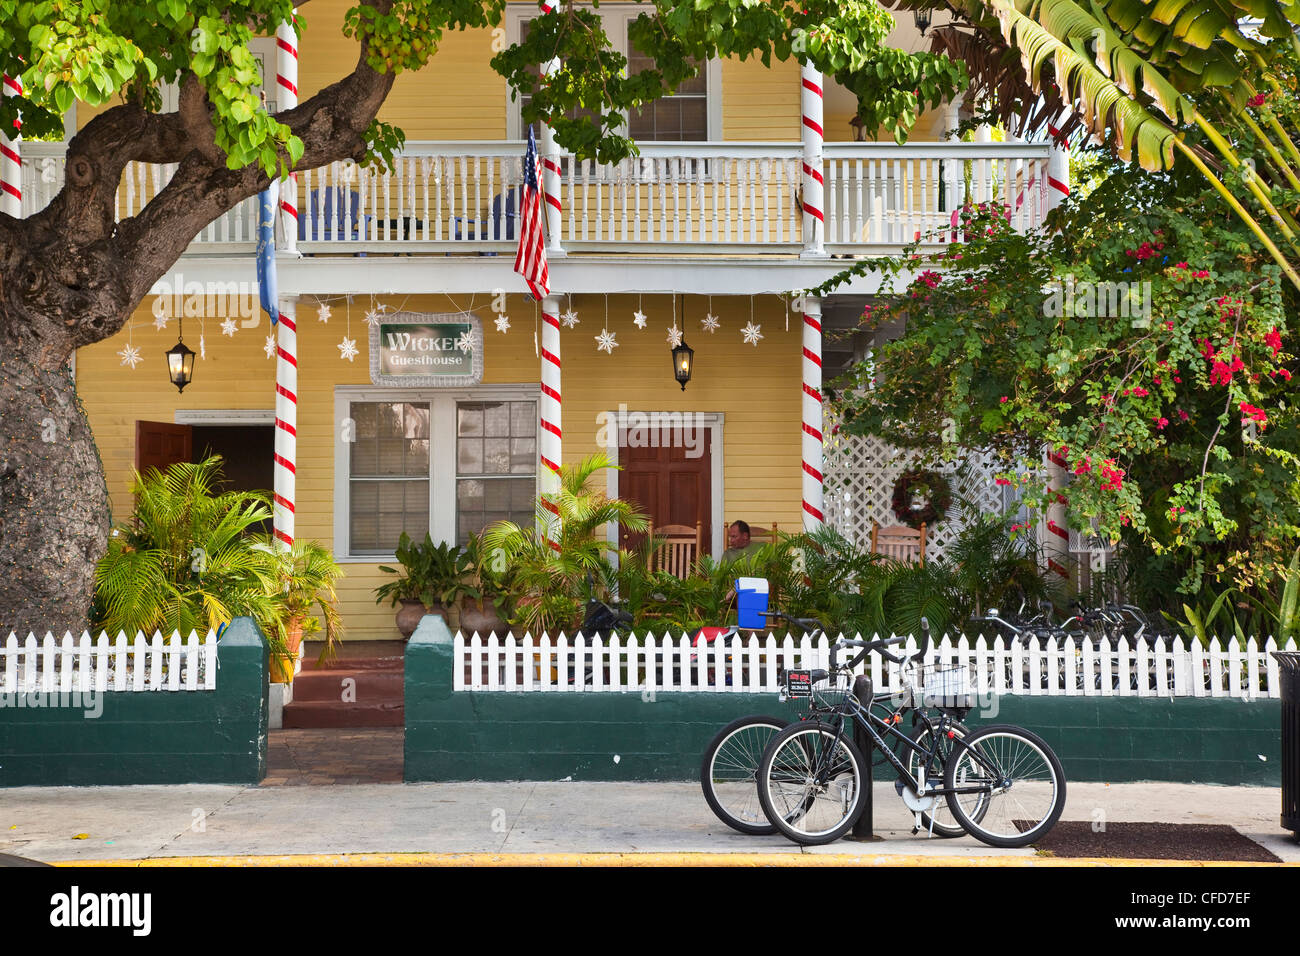 Portico of a quaint guesthouse on Duval Street in the old district of Key West, Florida, United States of America. Stock Photo